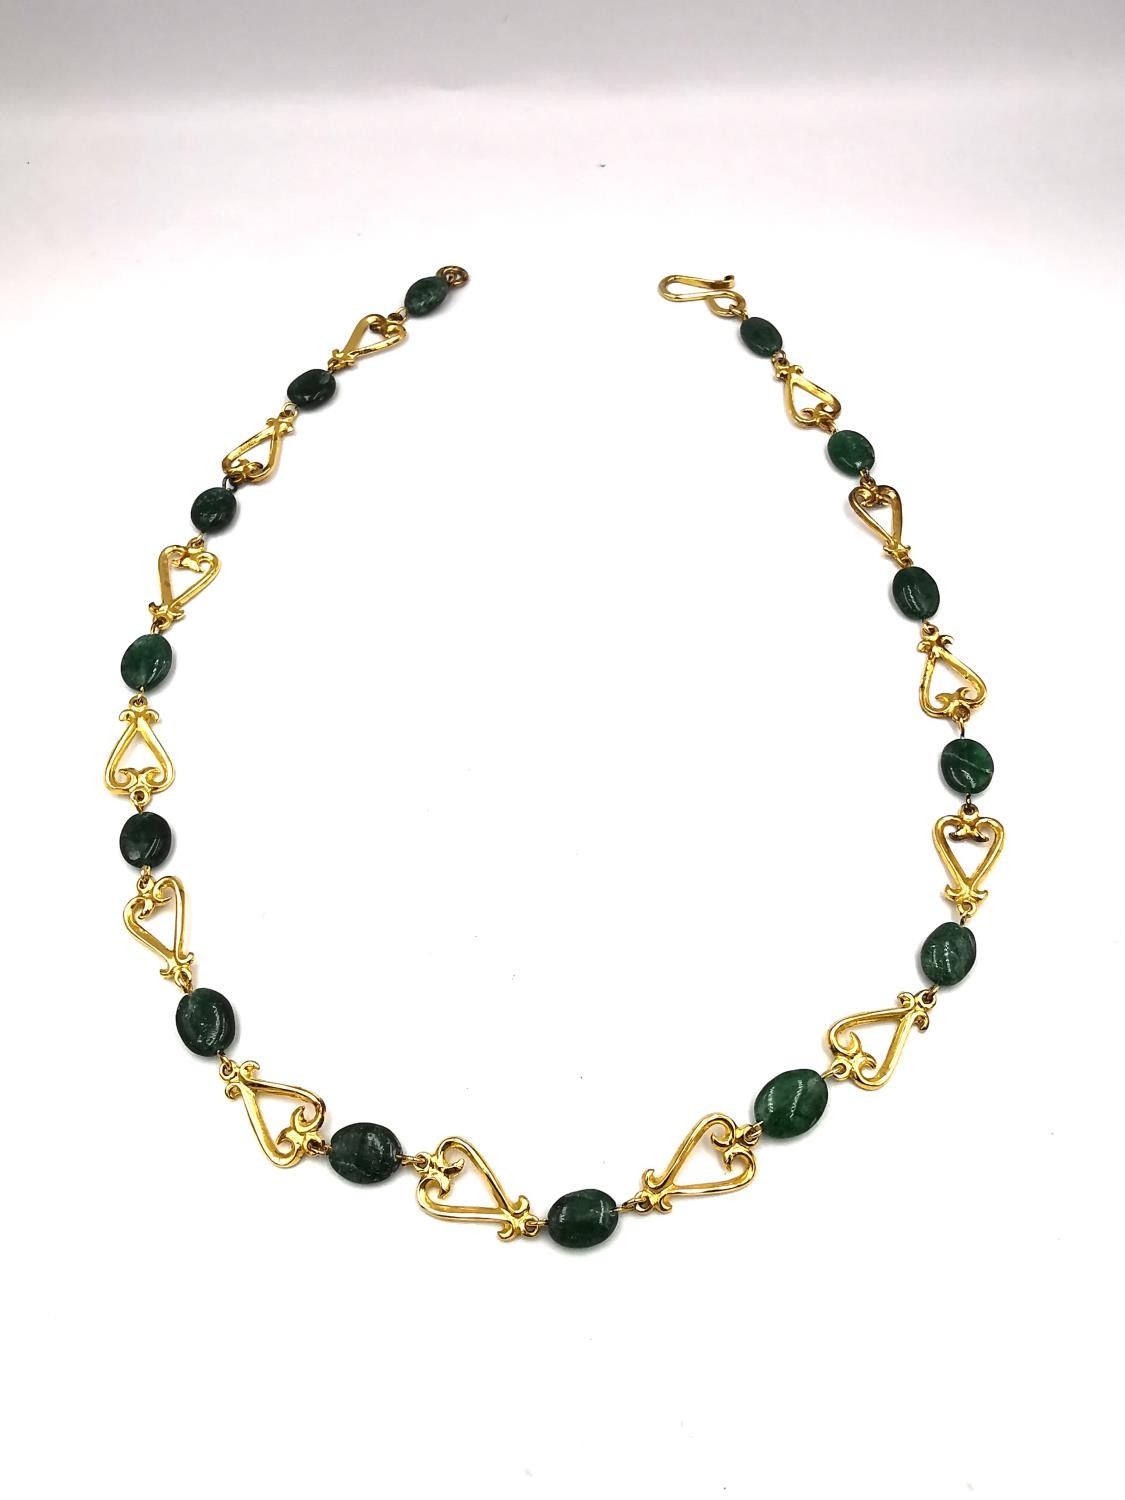 A boxed Past Times necklace based on a Roman Lyre necklace from 2nd century AD, gold plated on - Image 4 of 7